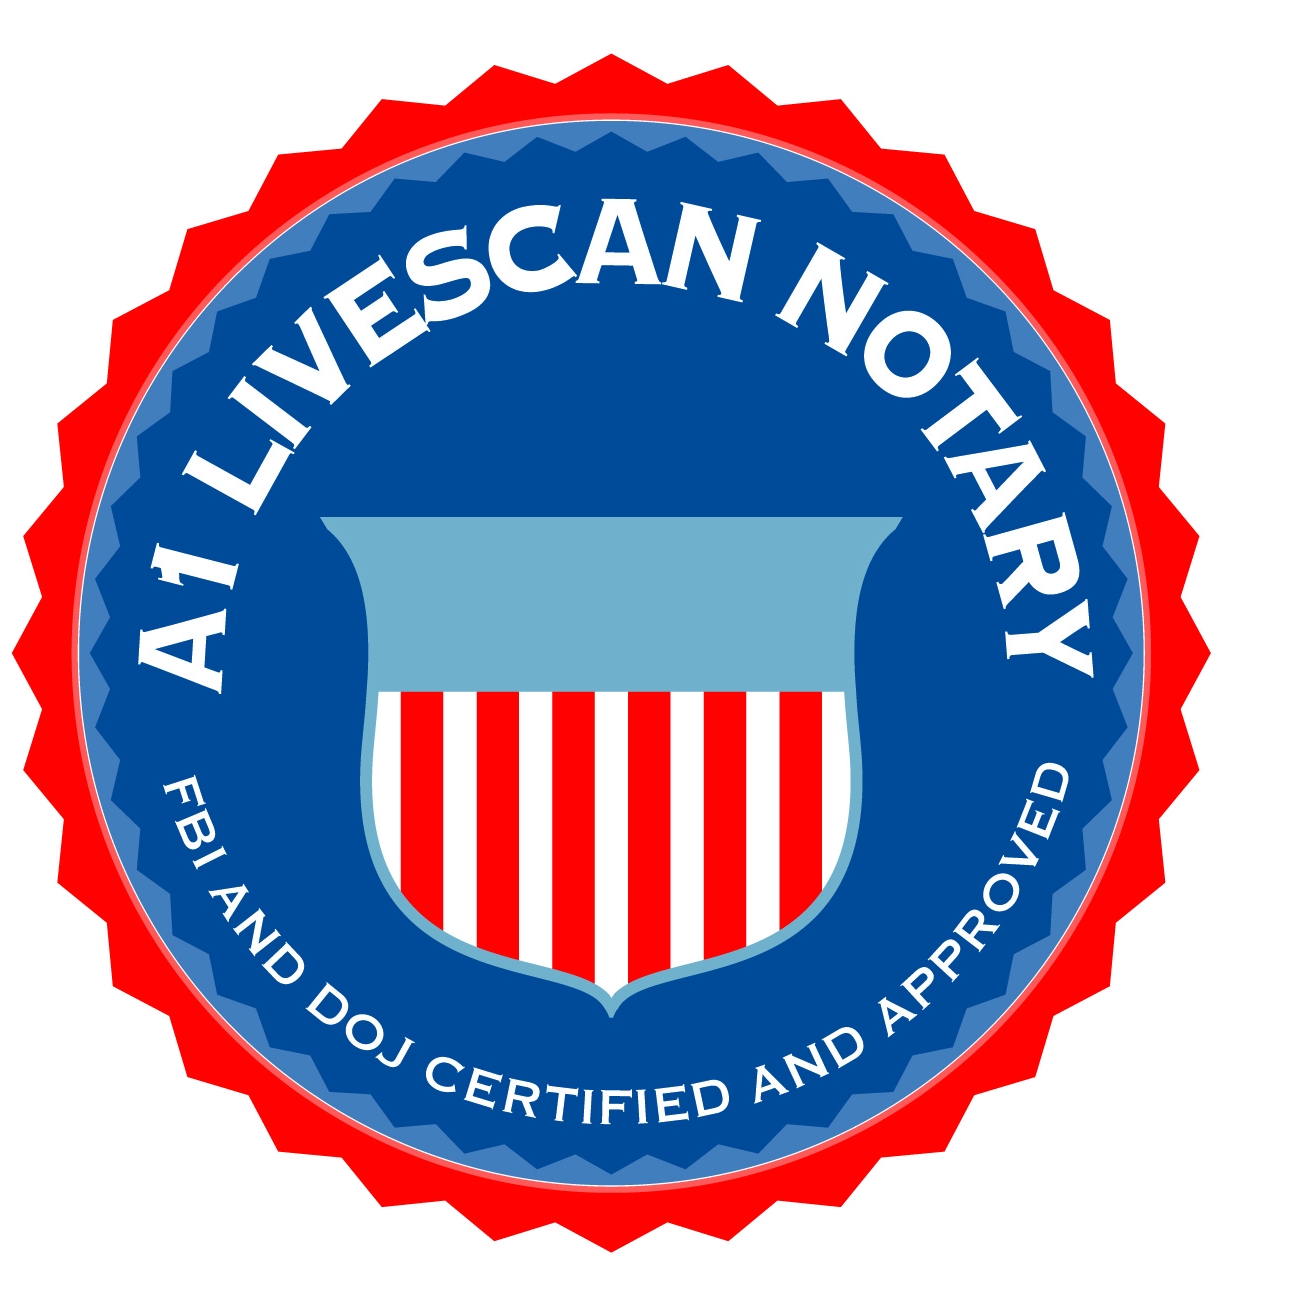 A1 Live Scan & Notary